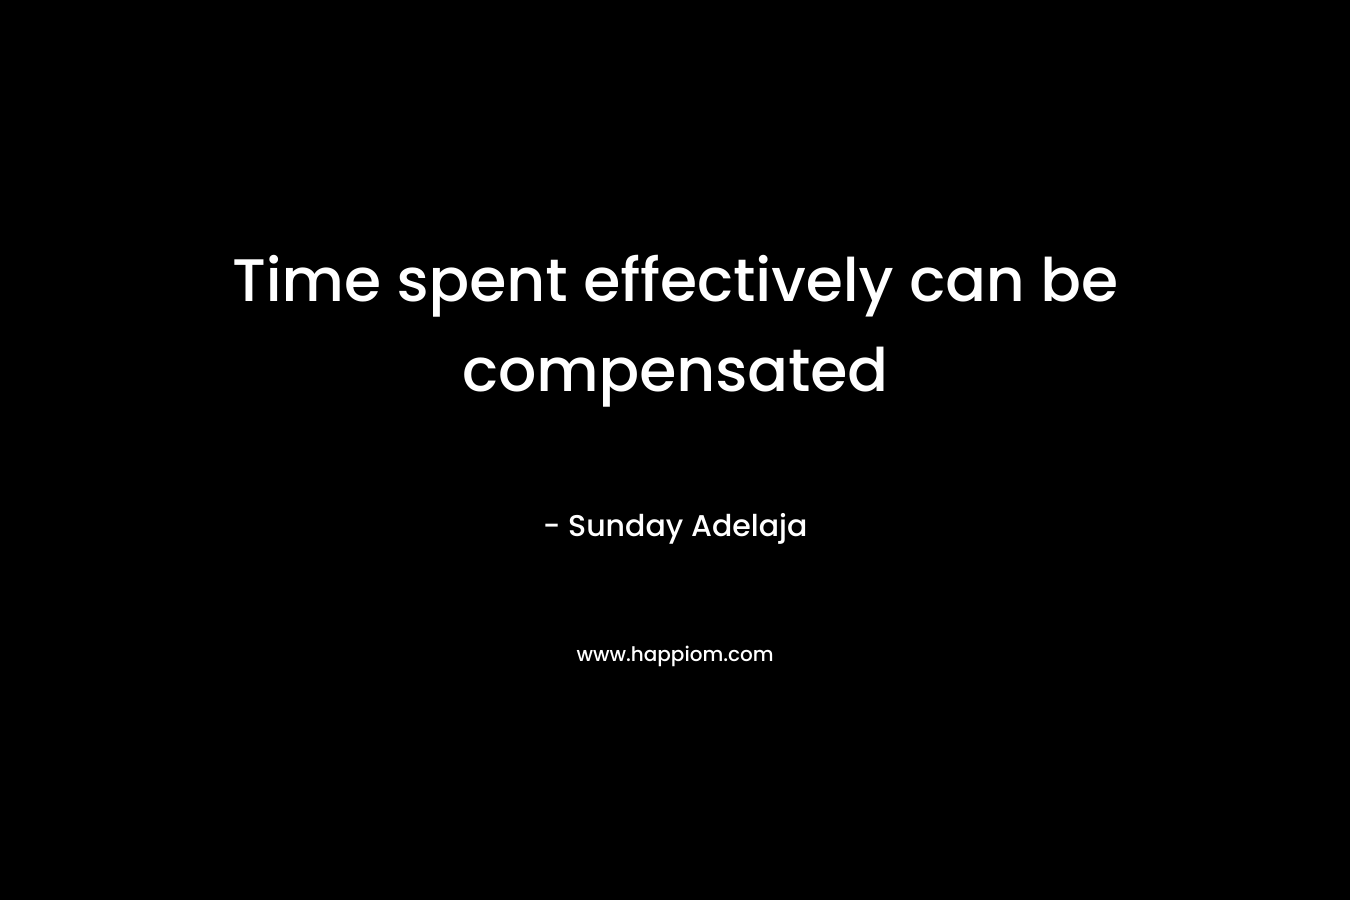 Time spent effectively can be compensated